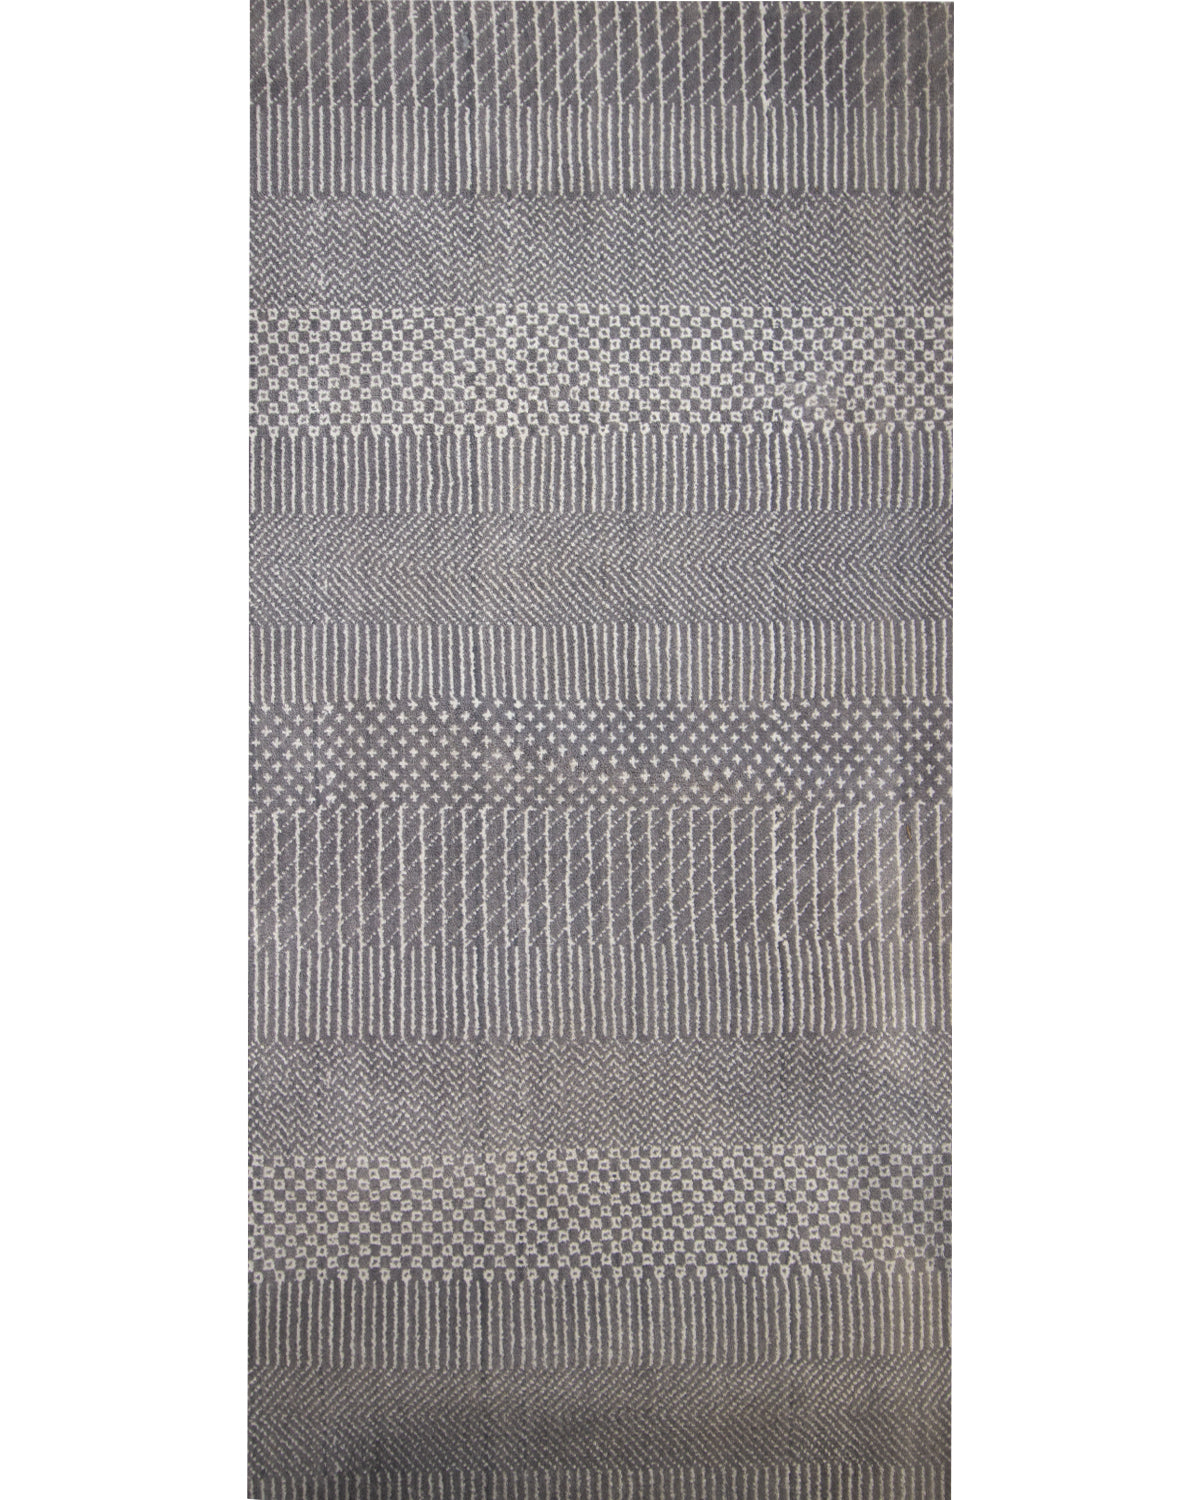 Grass Grey/Ivory Woven Runner Rug-Area rug for living room, dining area, and bedroom